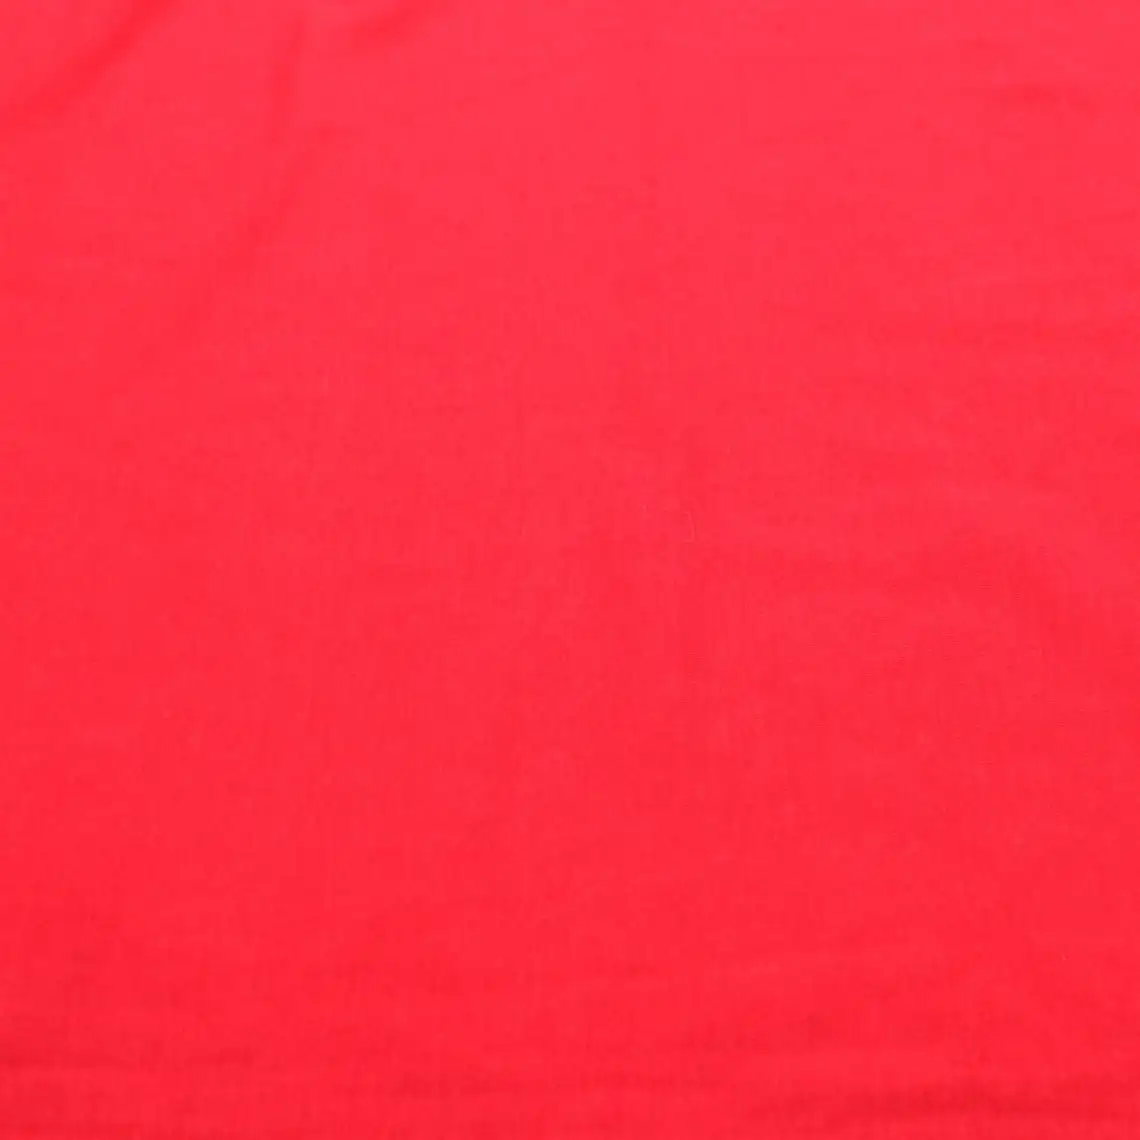 Red Cotton Modal Fabric - 160 GSM Style 791